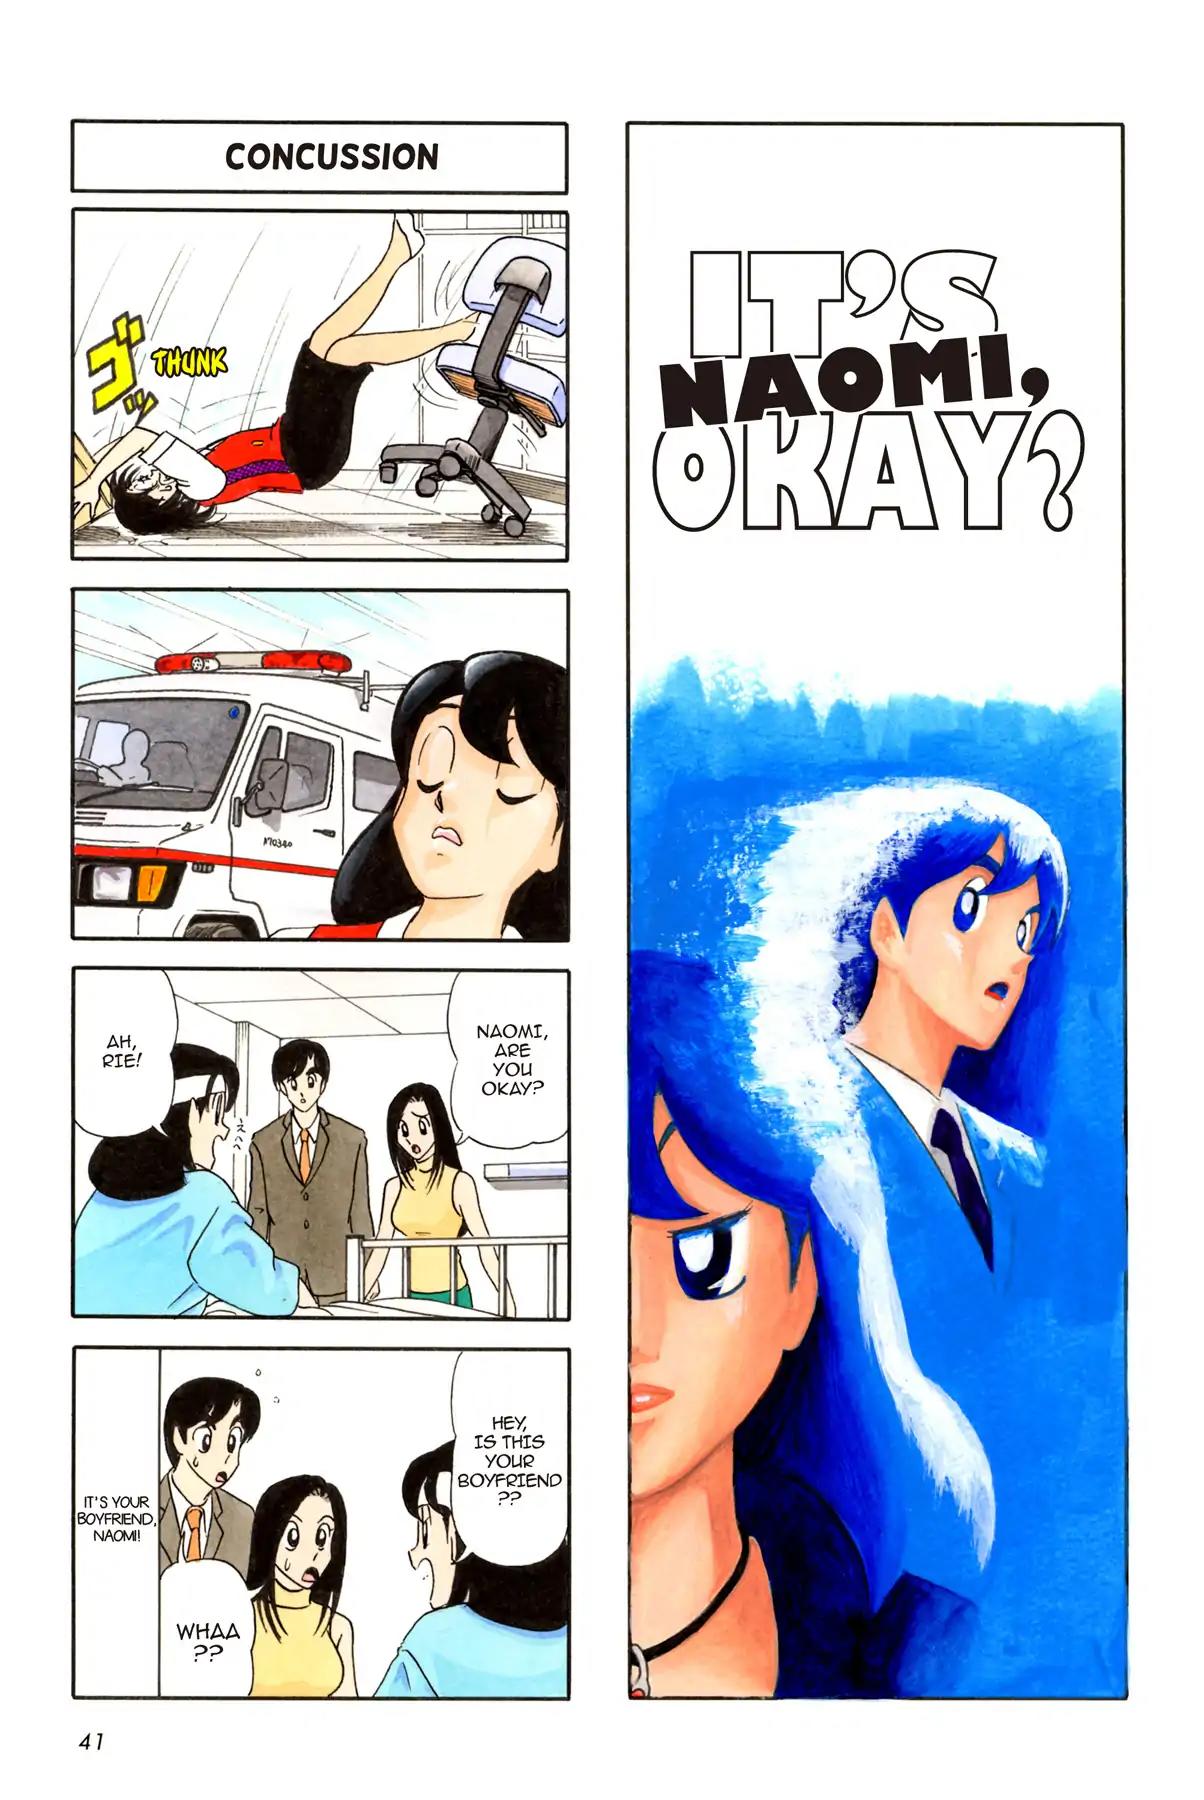 It's Naomi, Okay? After 16 Vol 1 Chapter 12